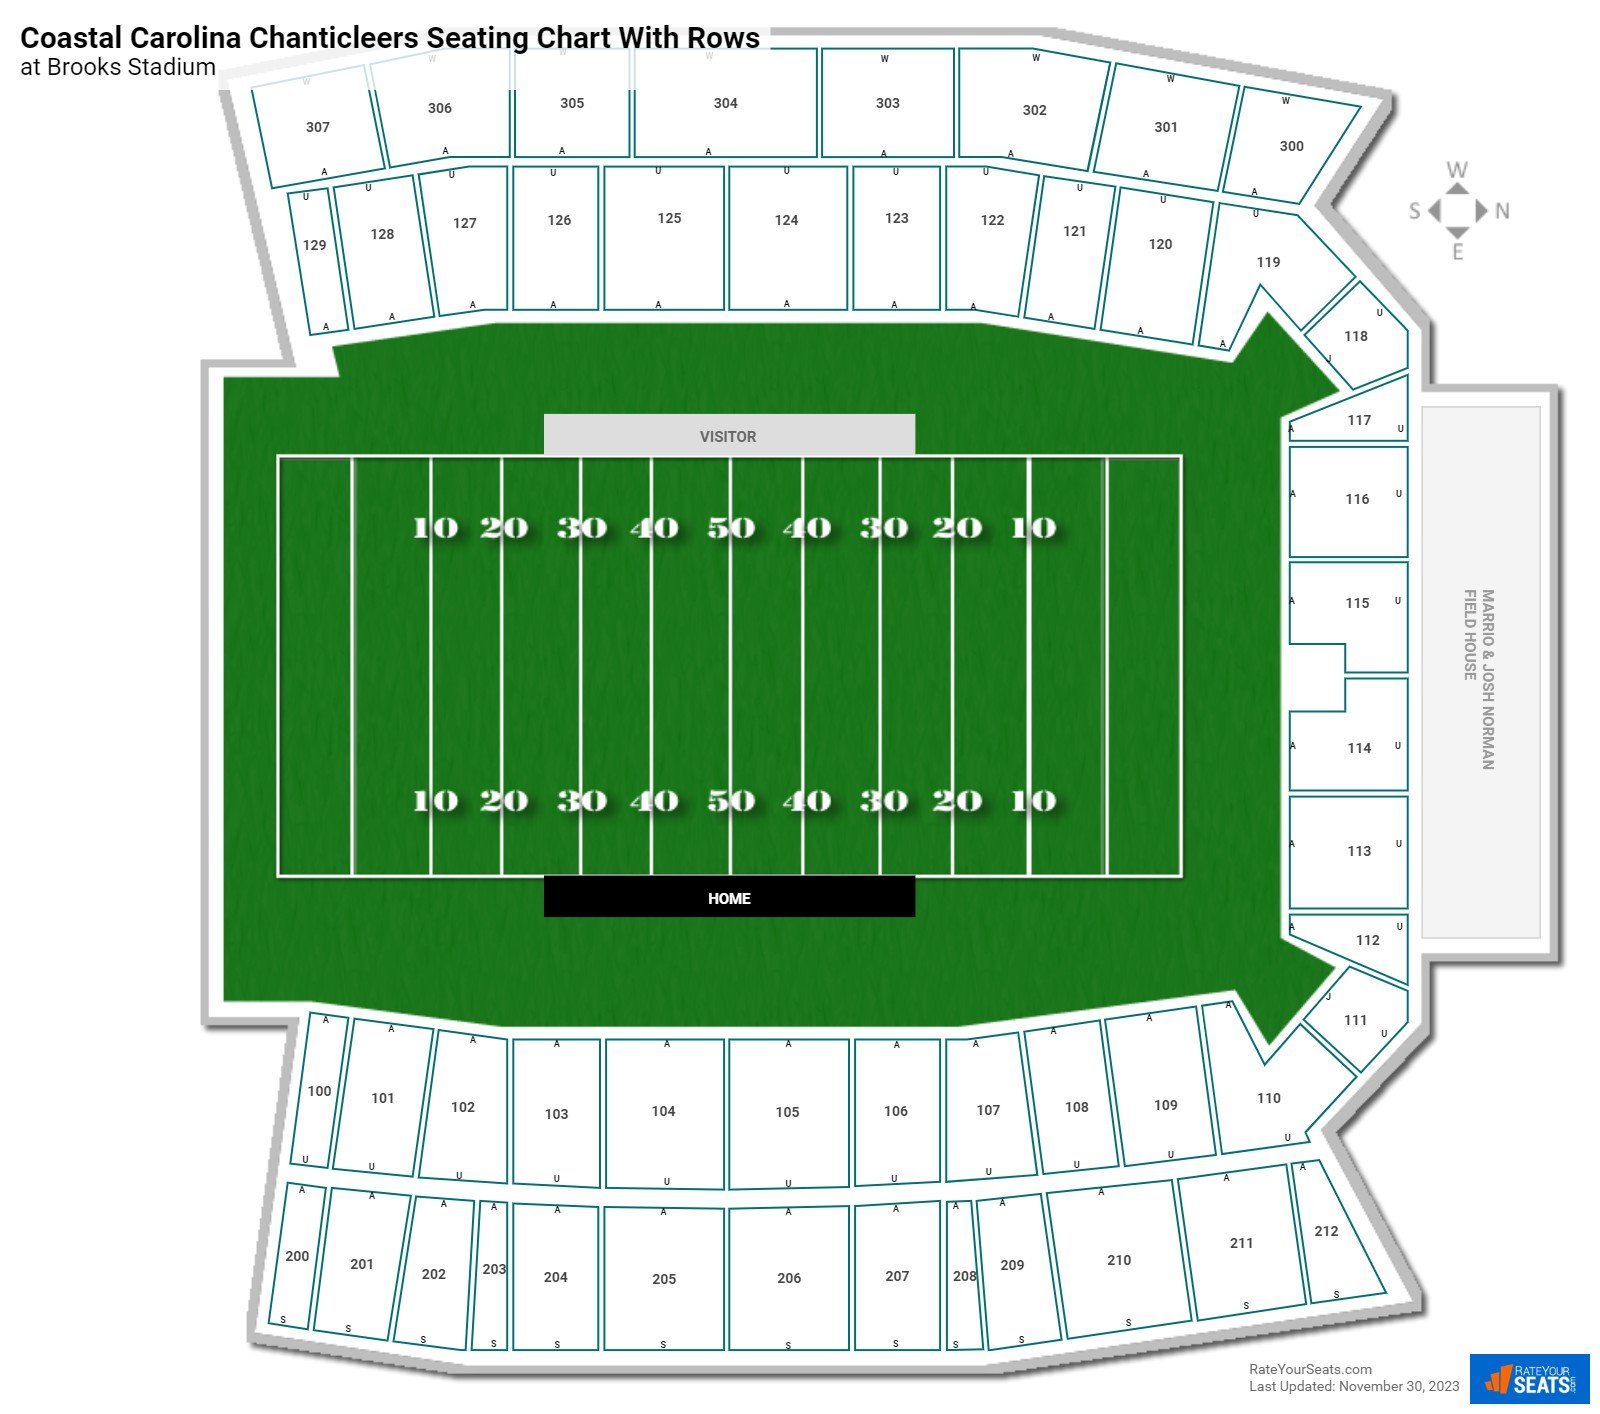 Brooks Stadium seating chart with row numbers